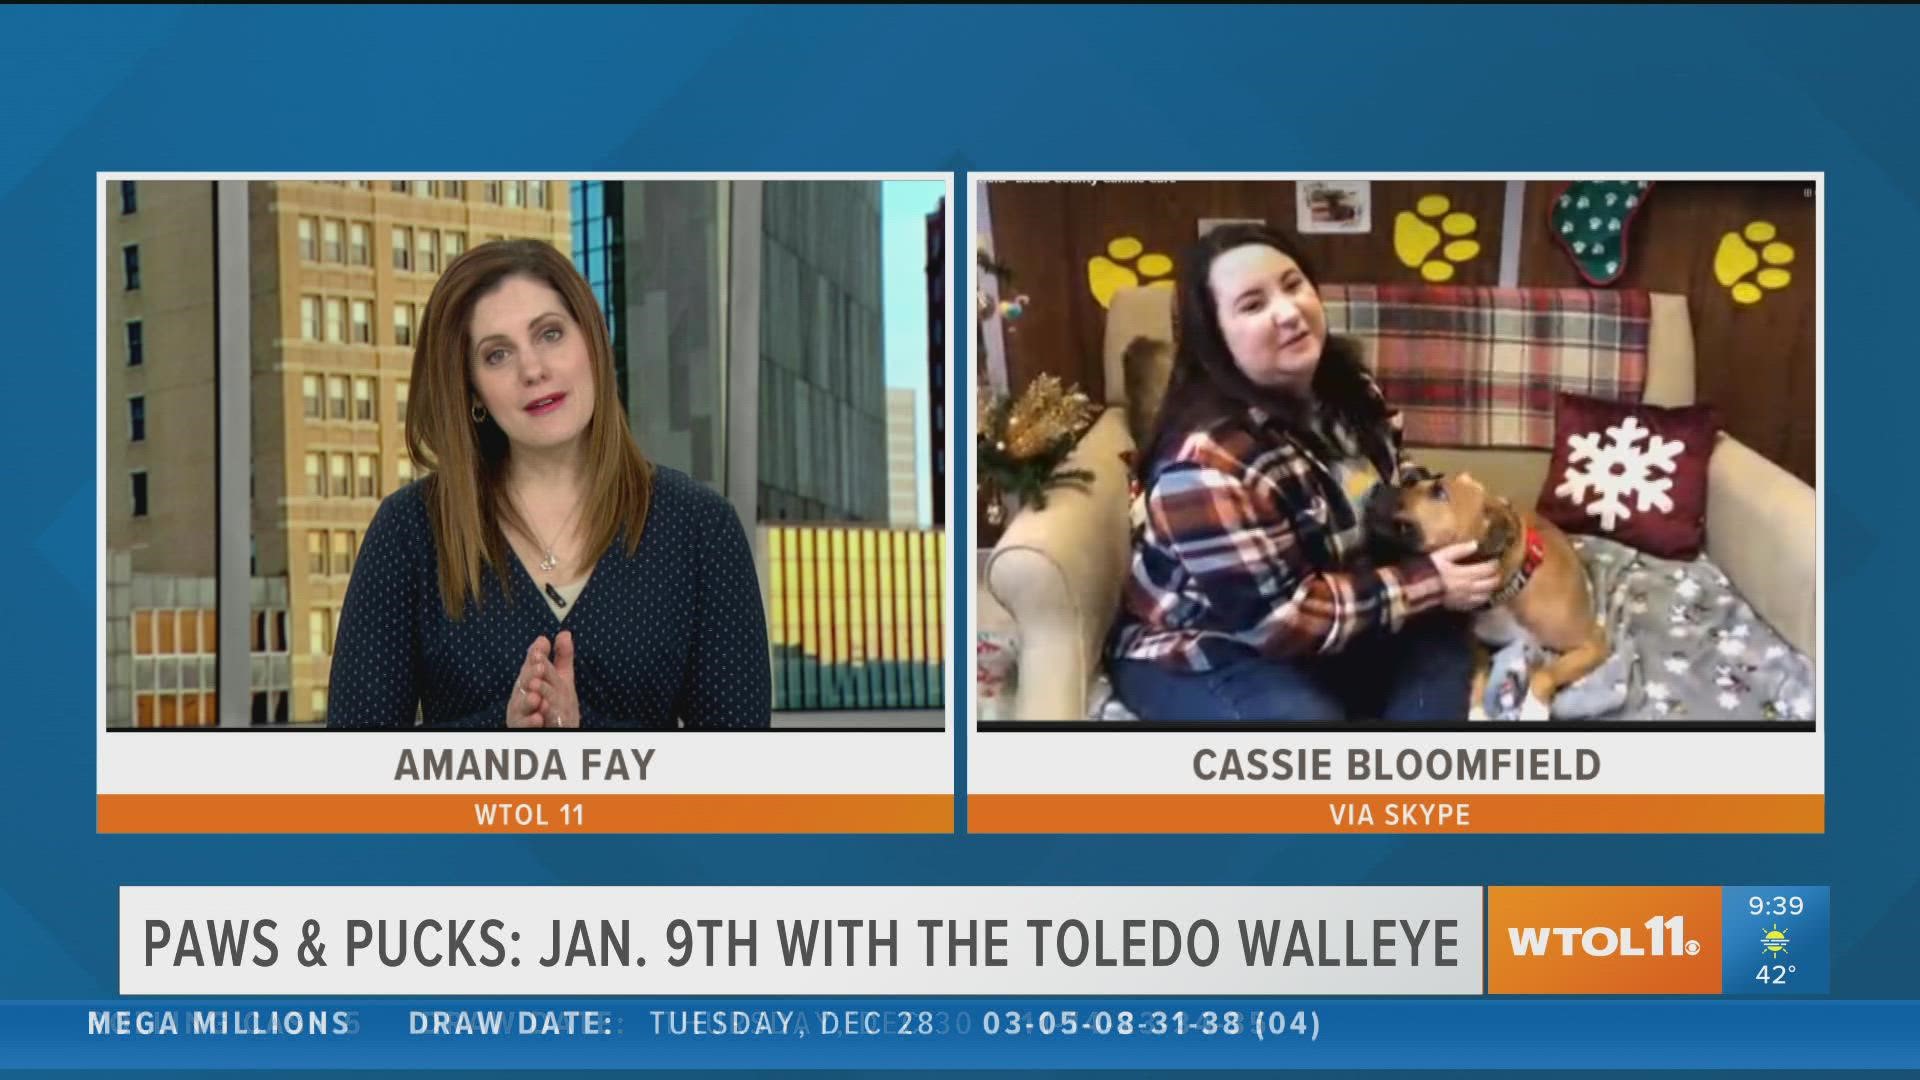 Bix the spokespup and Cassie Bloomfield tell you how to get a new dog license, and let you know about their upcoming event with the Walleye.